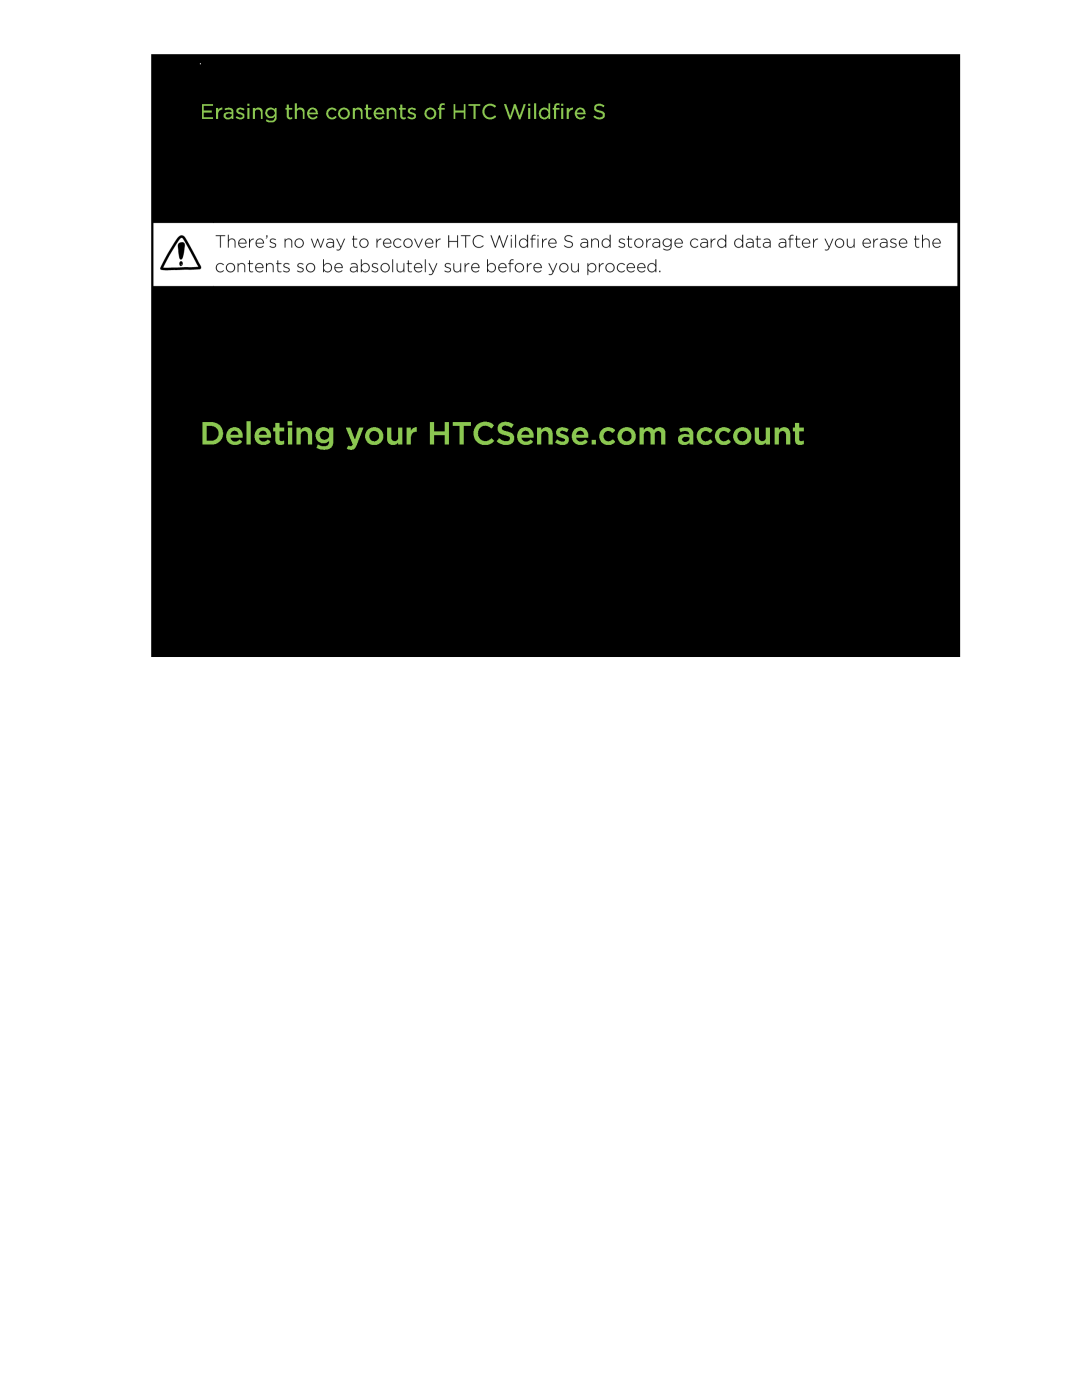 HTC manual Deleting your HTCSense.com account, Erasing the contents of HTC Wildfire S 